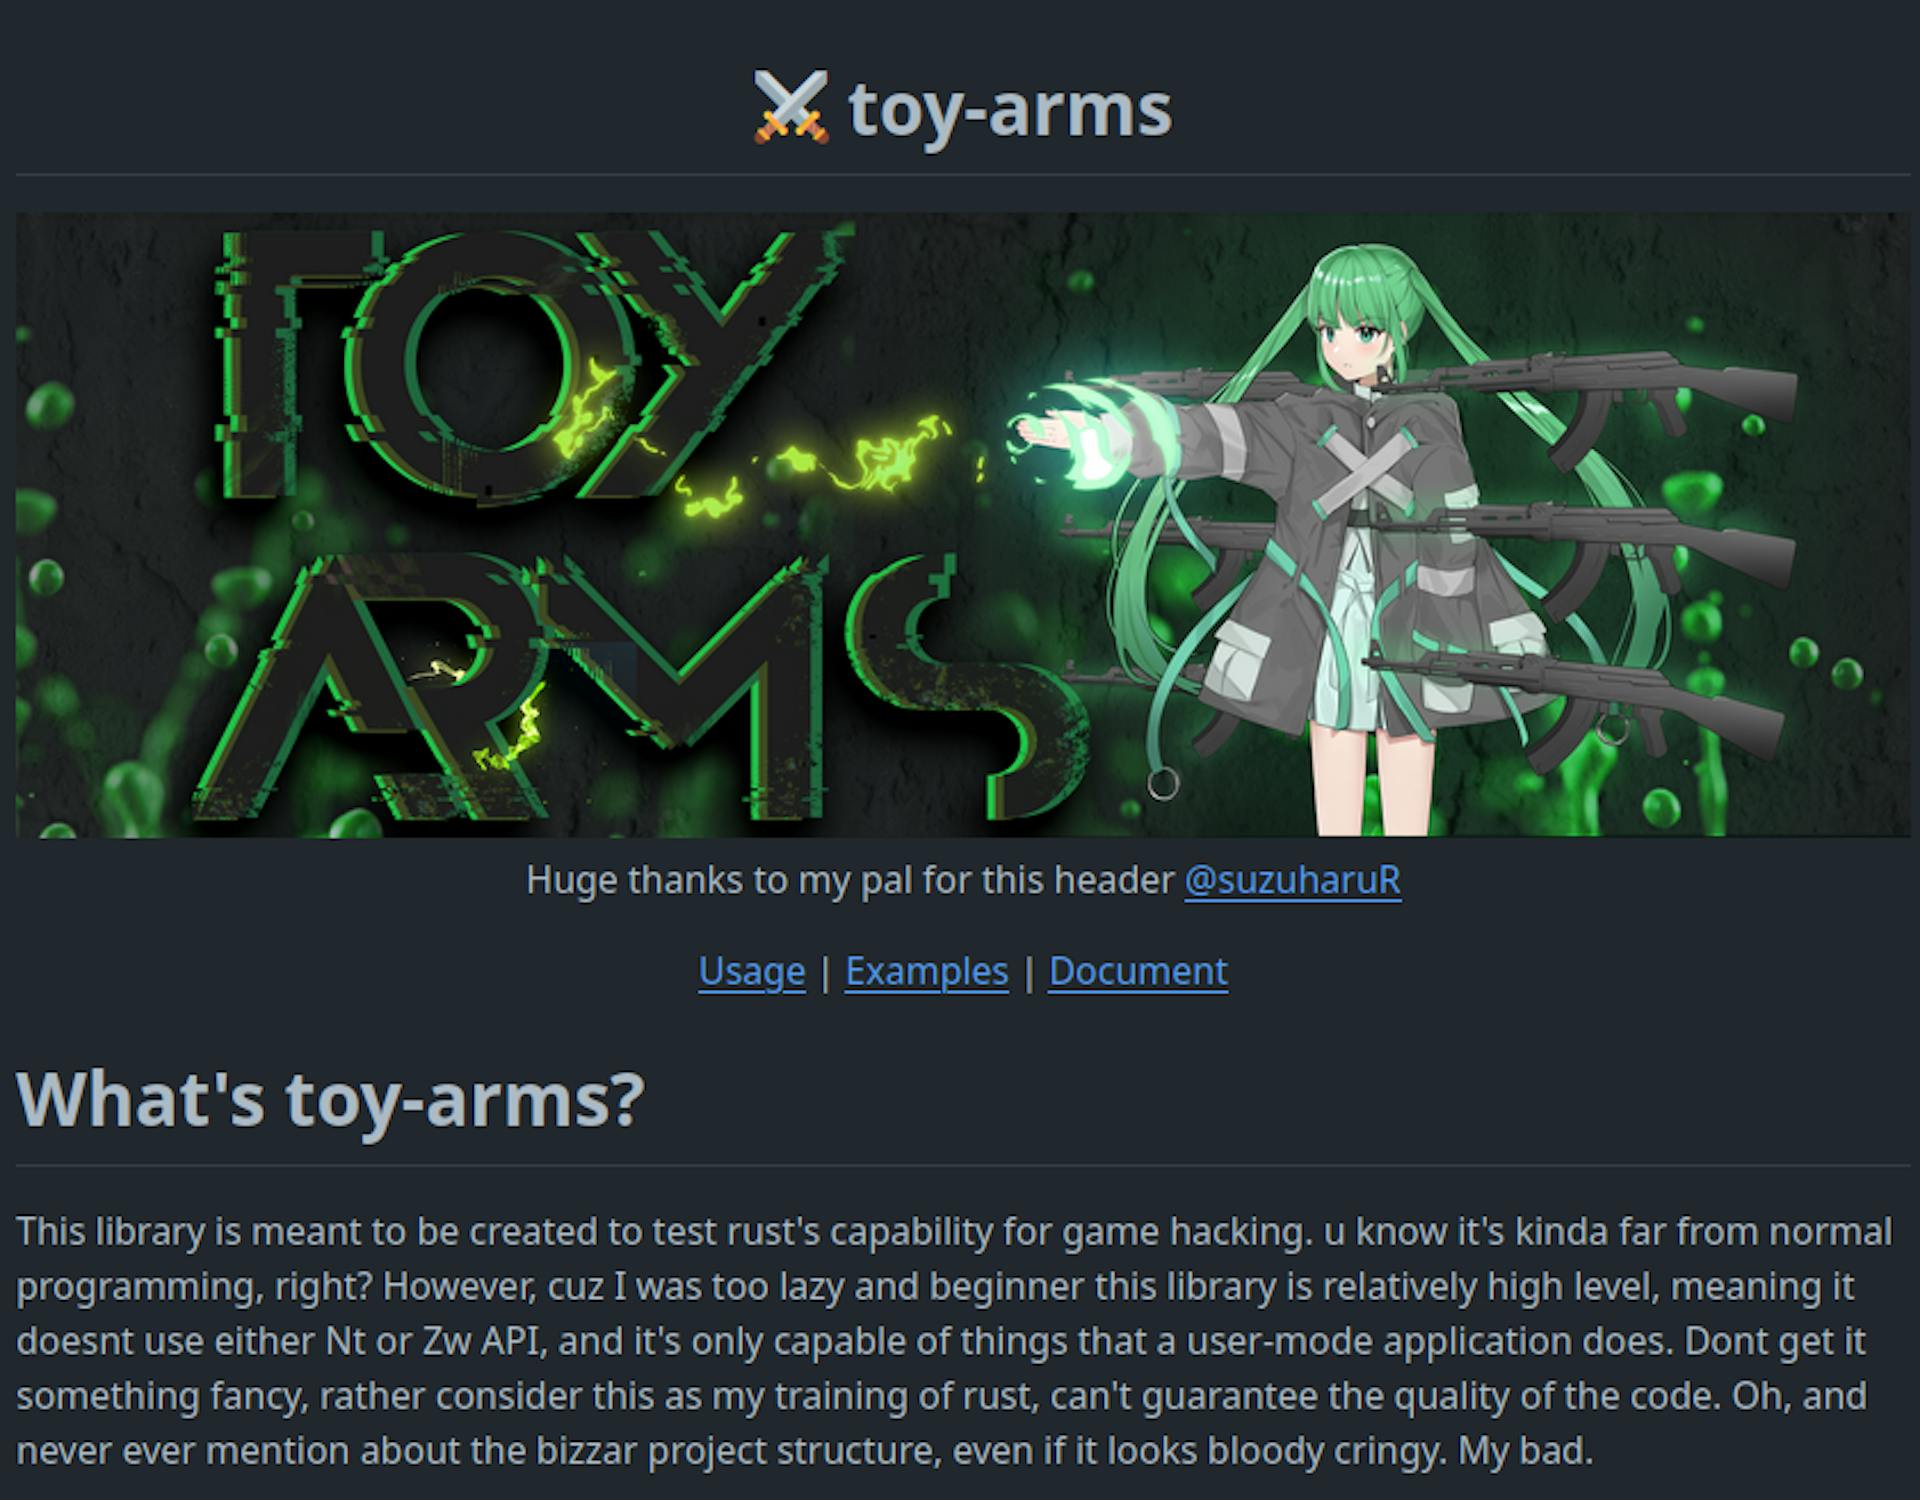 Github of toy-arms